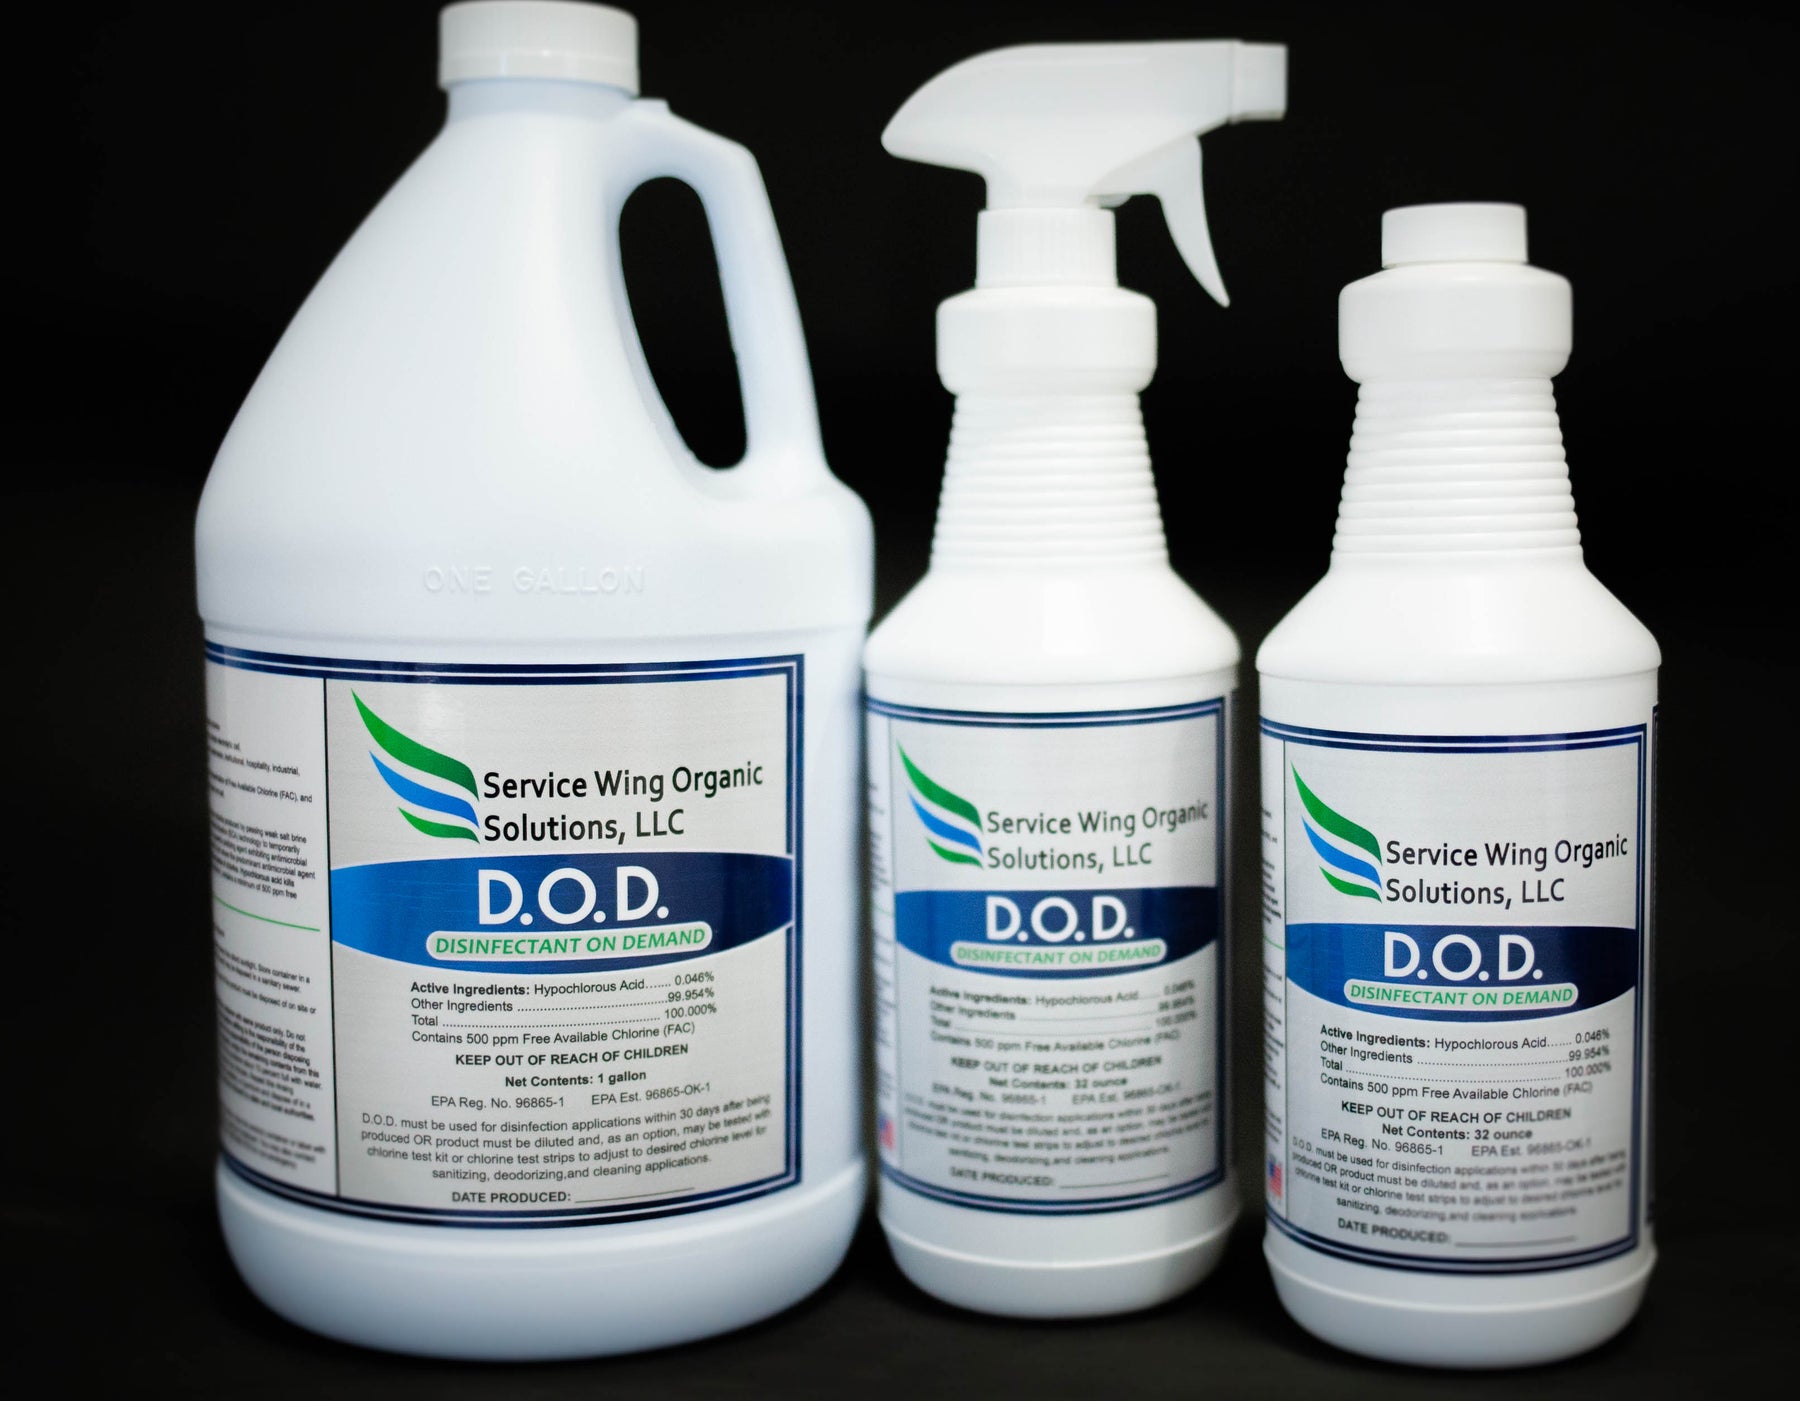 Service Wing now offering ready-to-use containers of Disinfectant on Demand through online store.